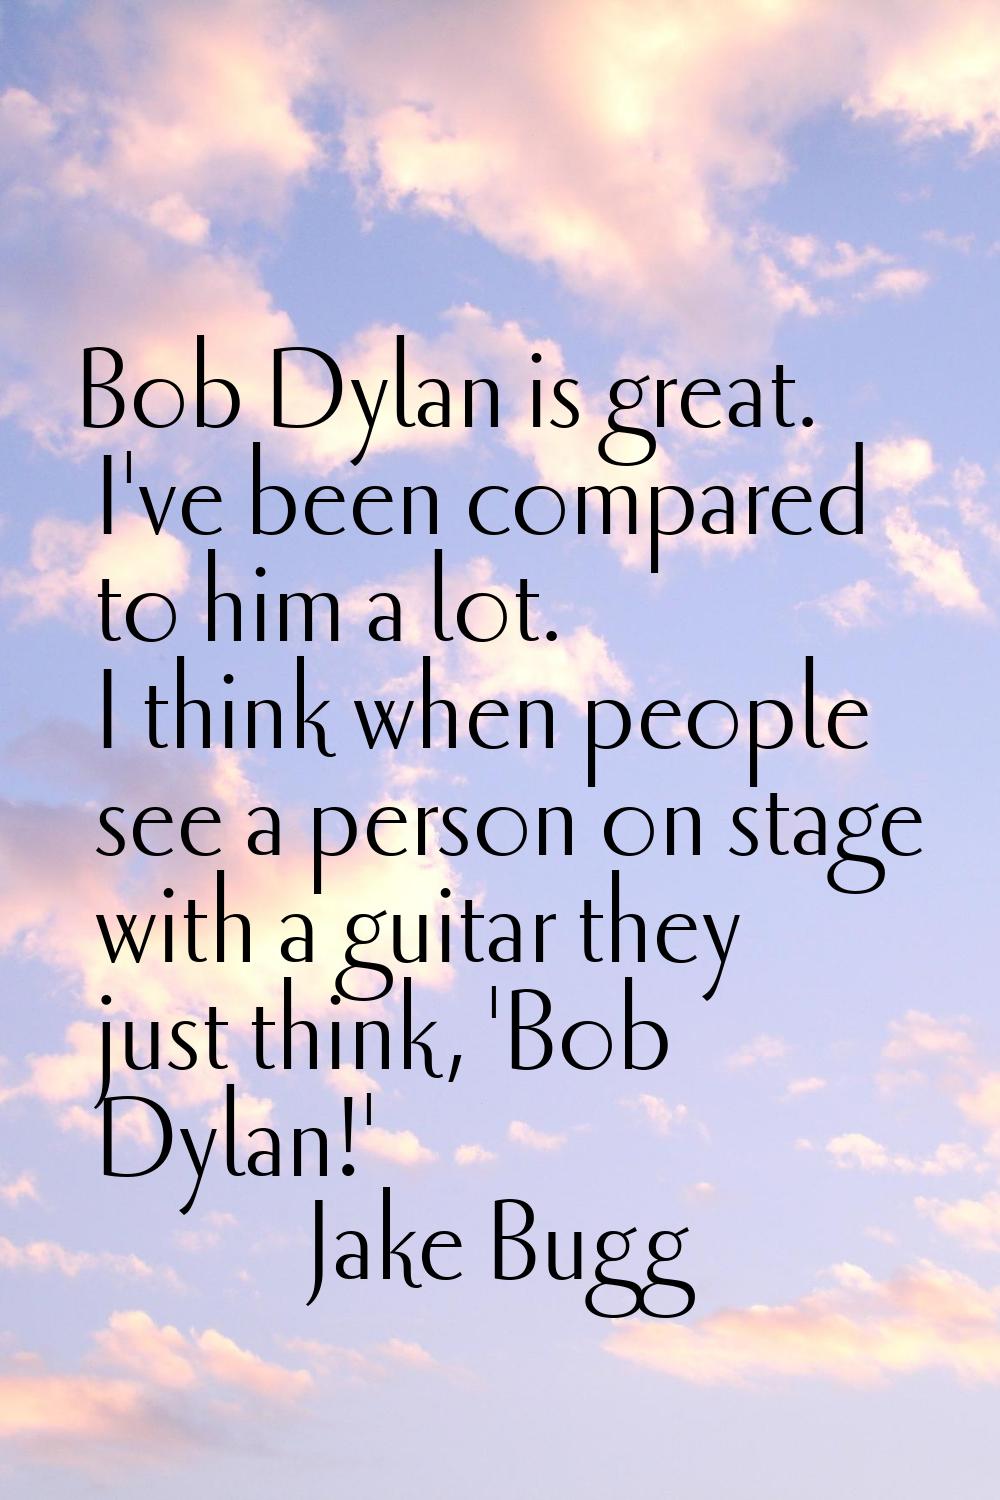 Bob Dylan is great. I've been compared to him a lot. I think when people see a person on stage with